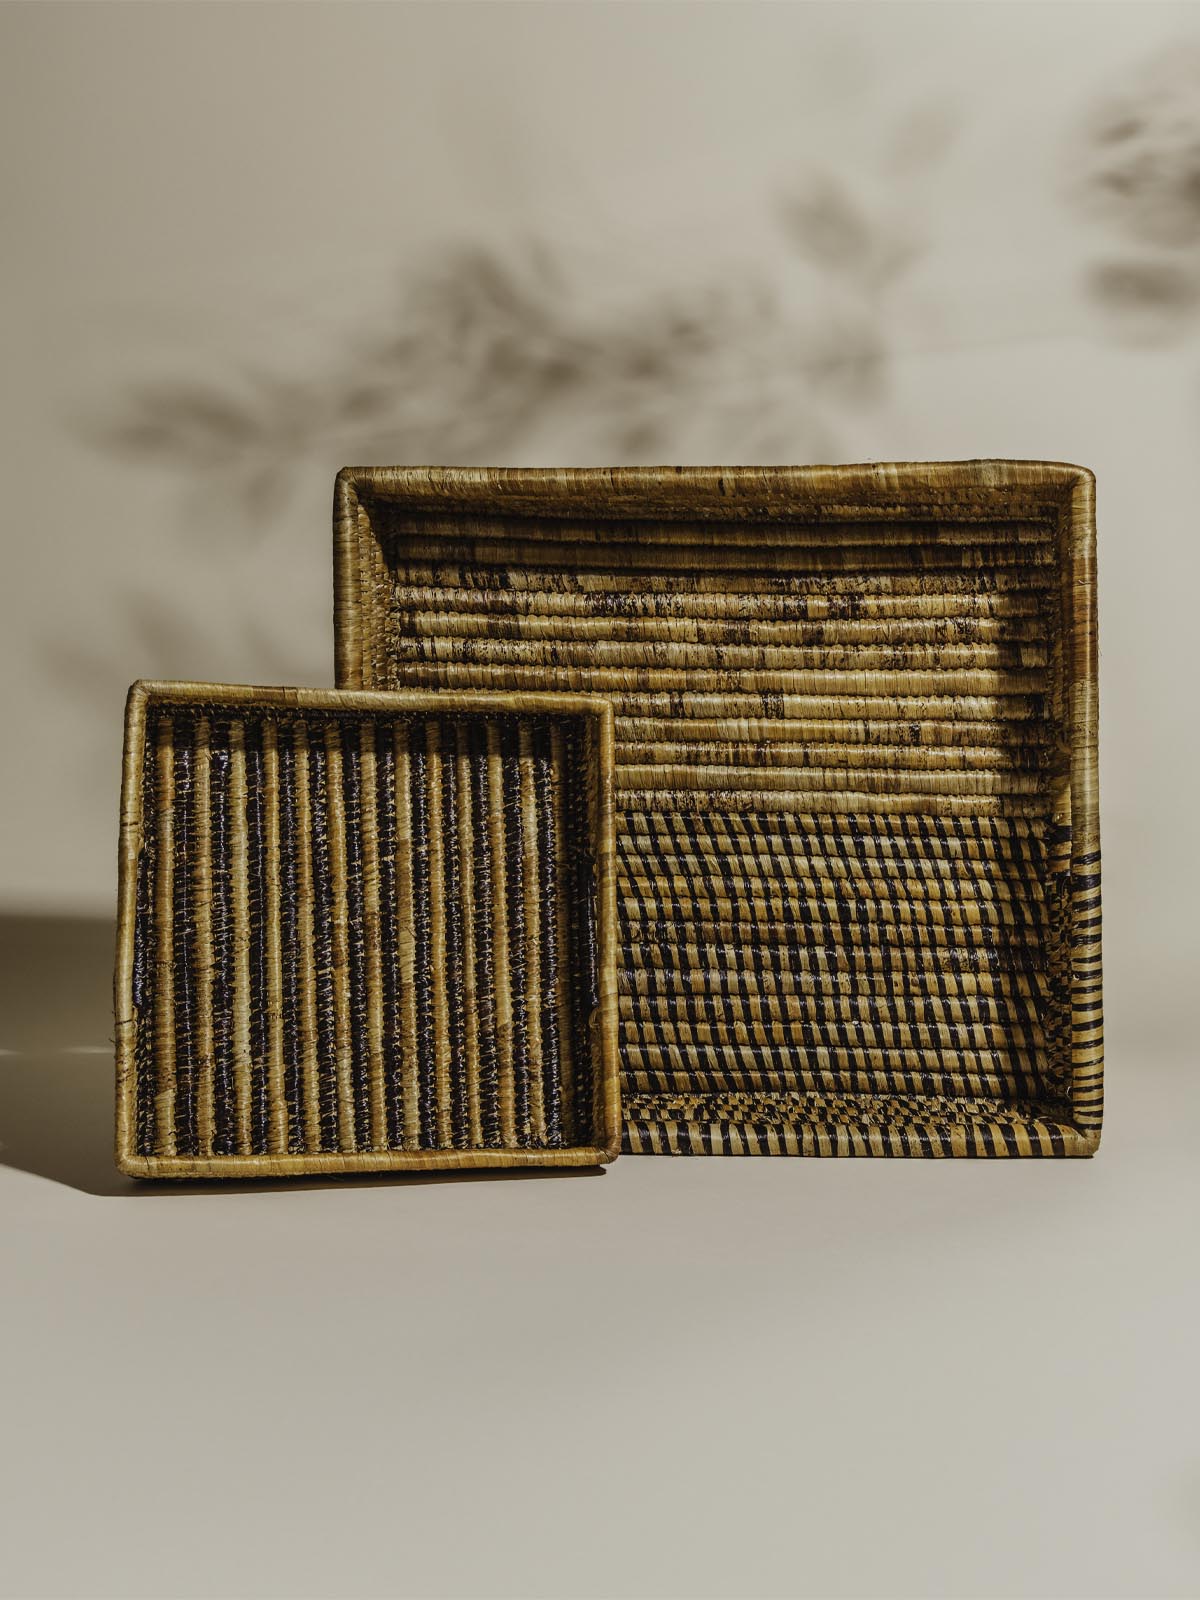 Two brown woven baskets in a square shape